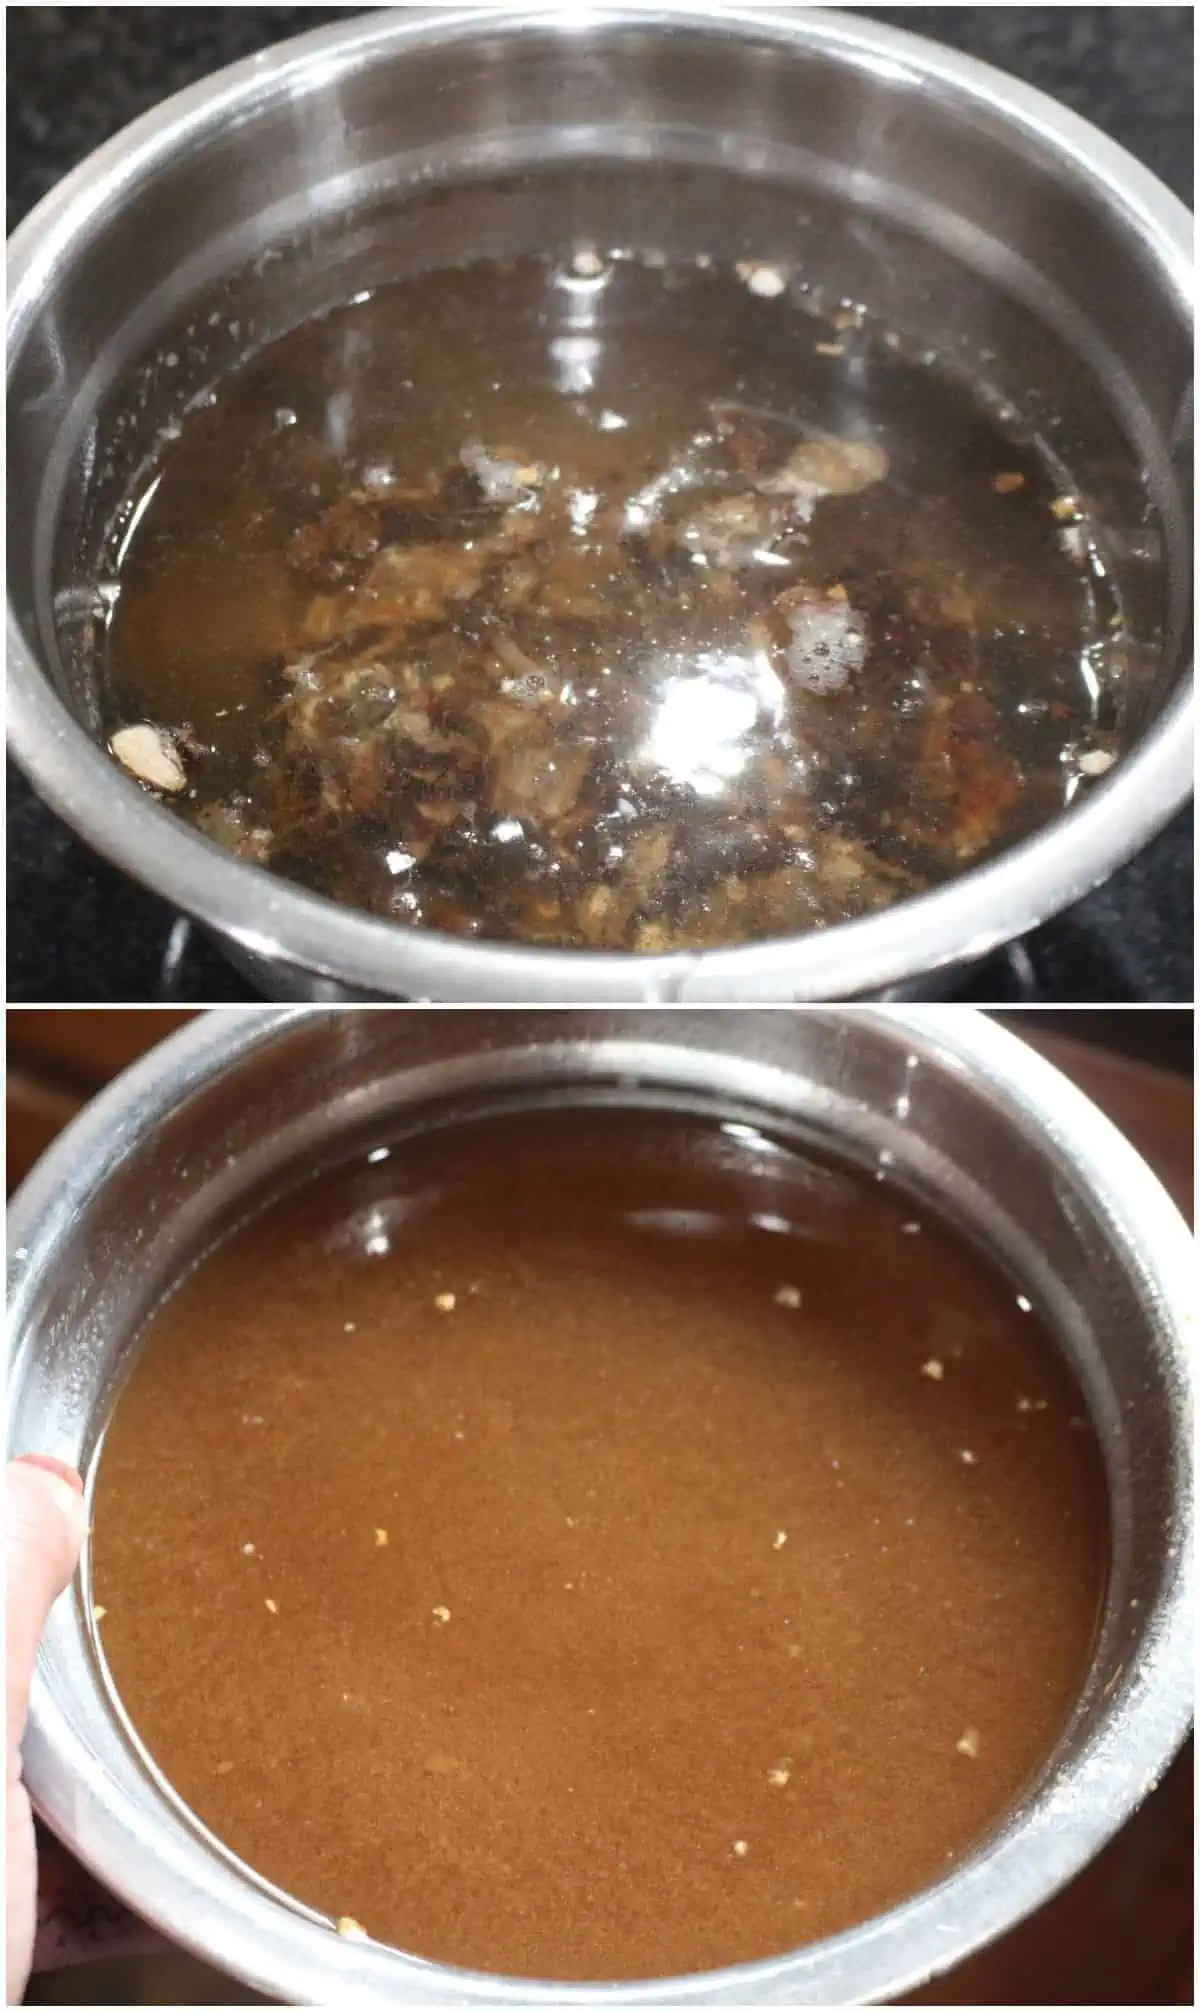 Tamarind soaked in hot water.